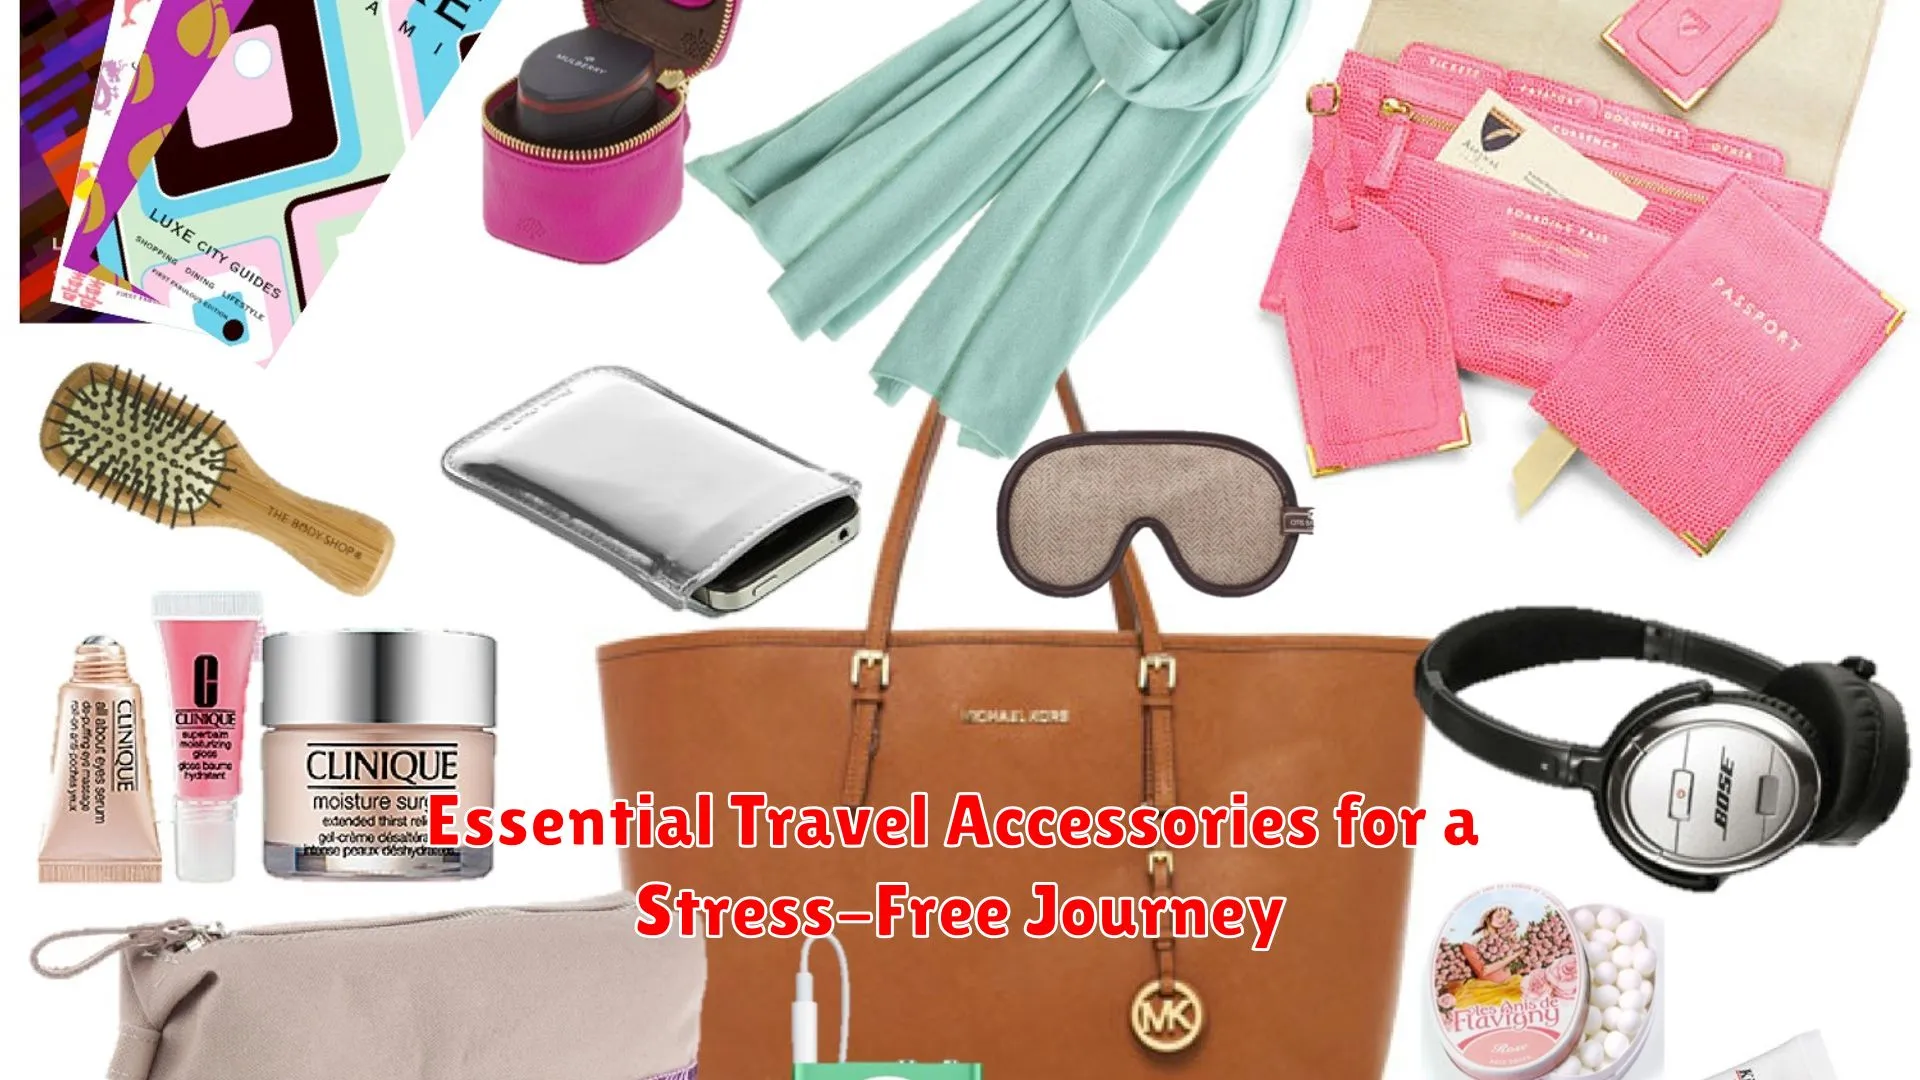 Essential Travel Accessories for a Stress-Free Journey